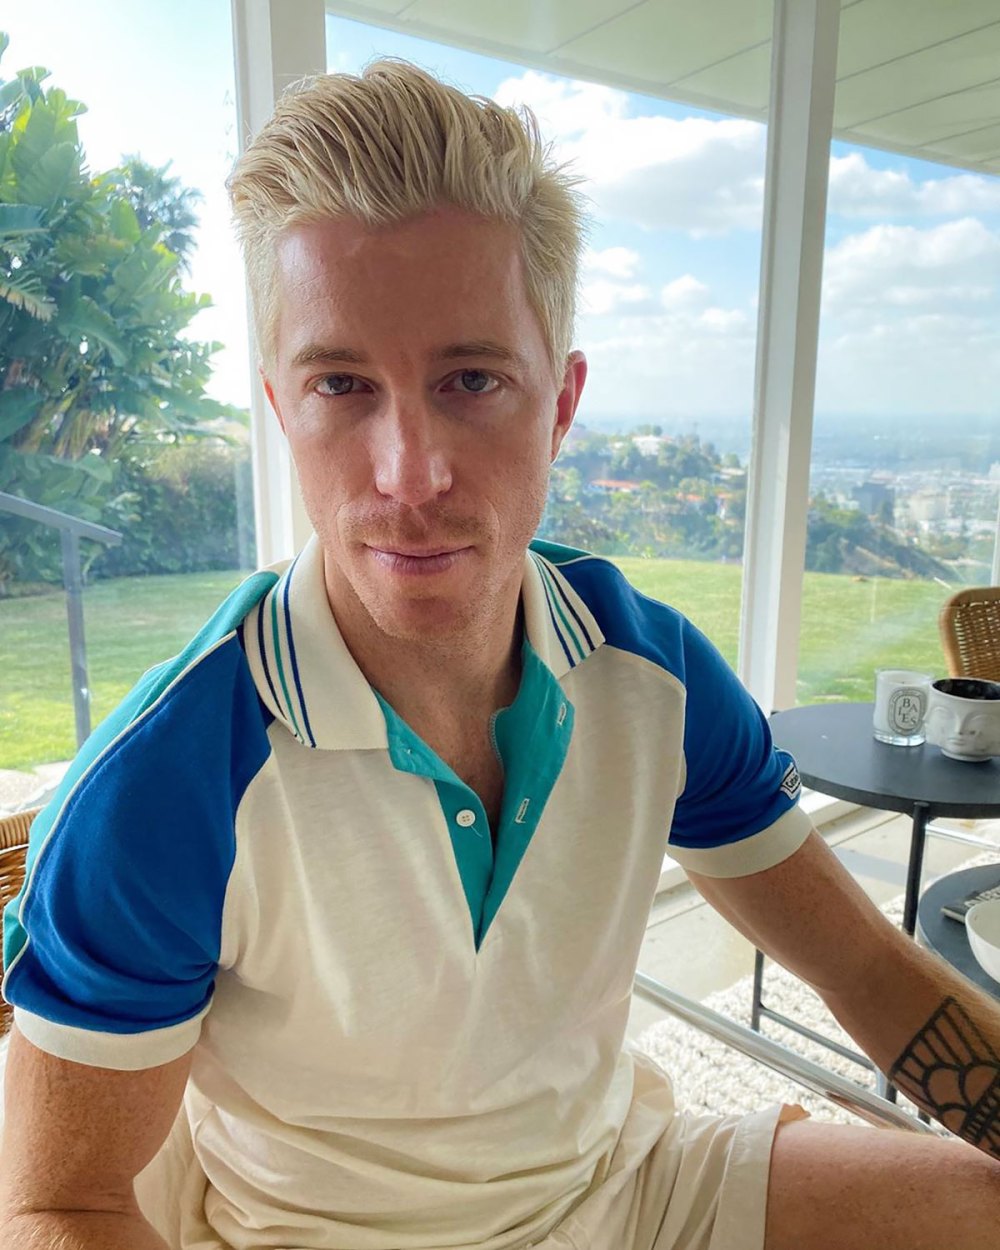 Shaun White Reveals His New Hair Color: Pic